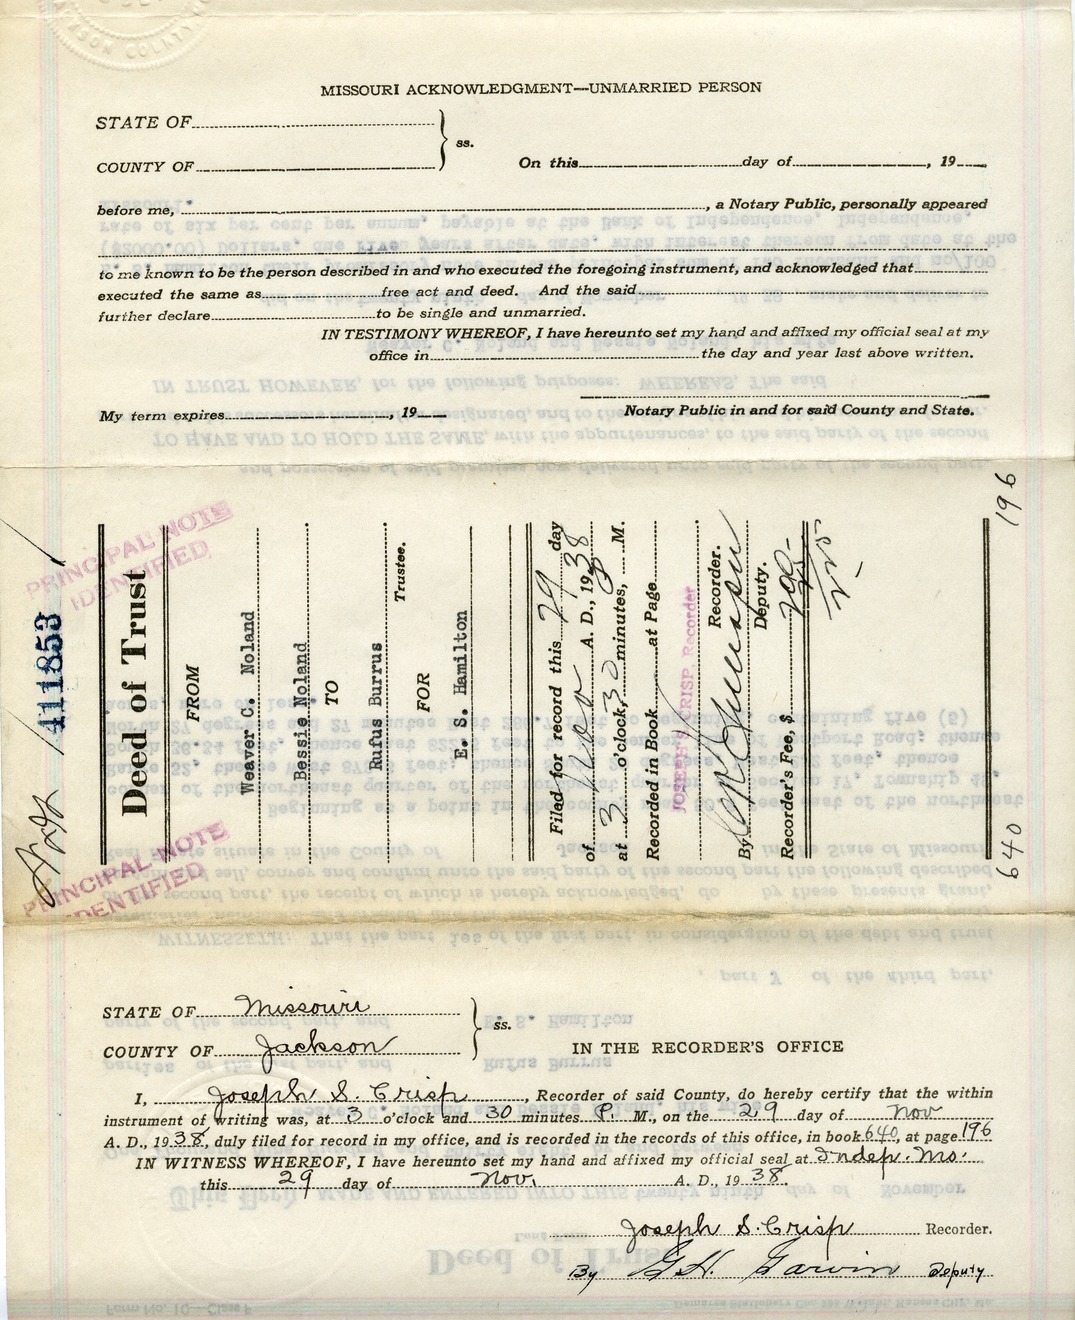 Deed of Trust from Weaver C. Noland and Bessie Noland to Rufus Burrus for E. S. Hamilton